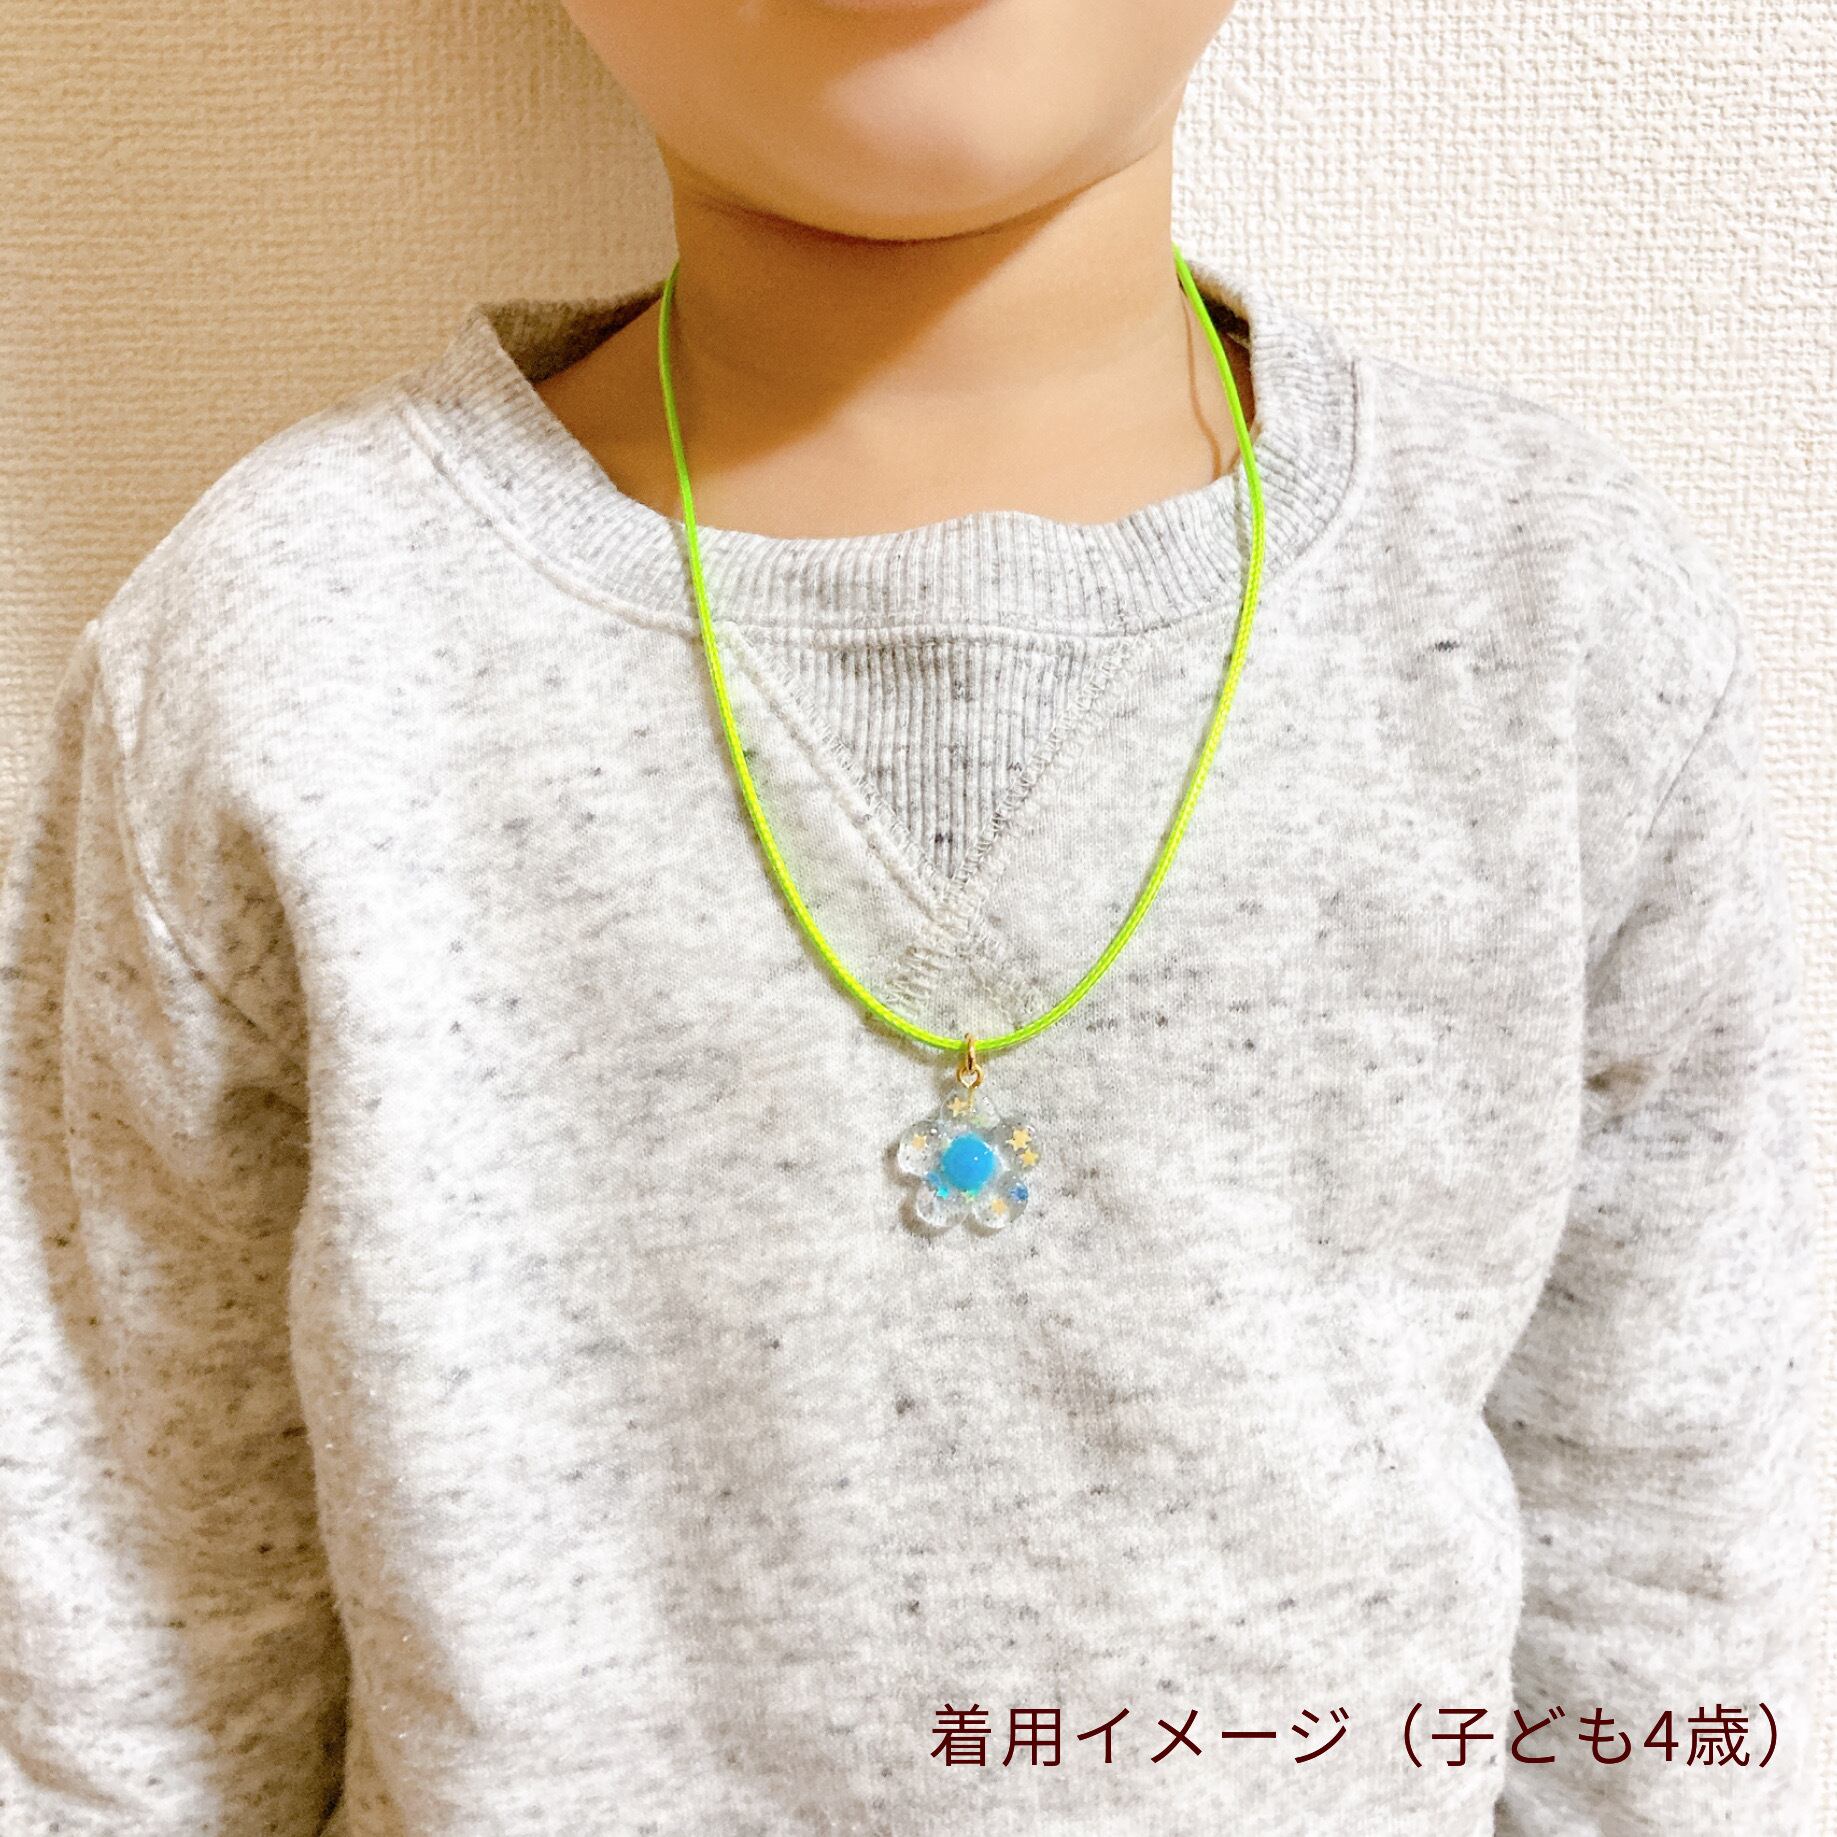 little   necklace  （ m - 2 ）  キッズネックレス